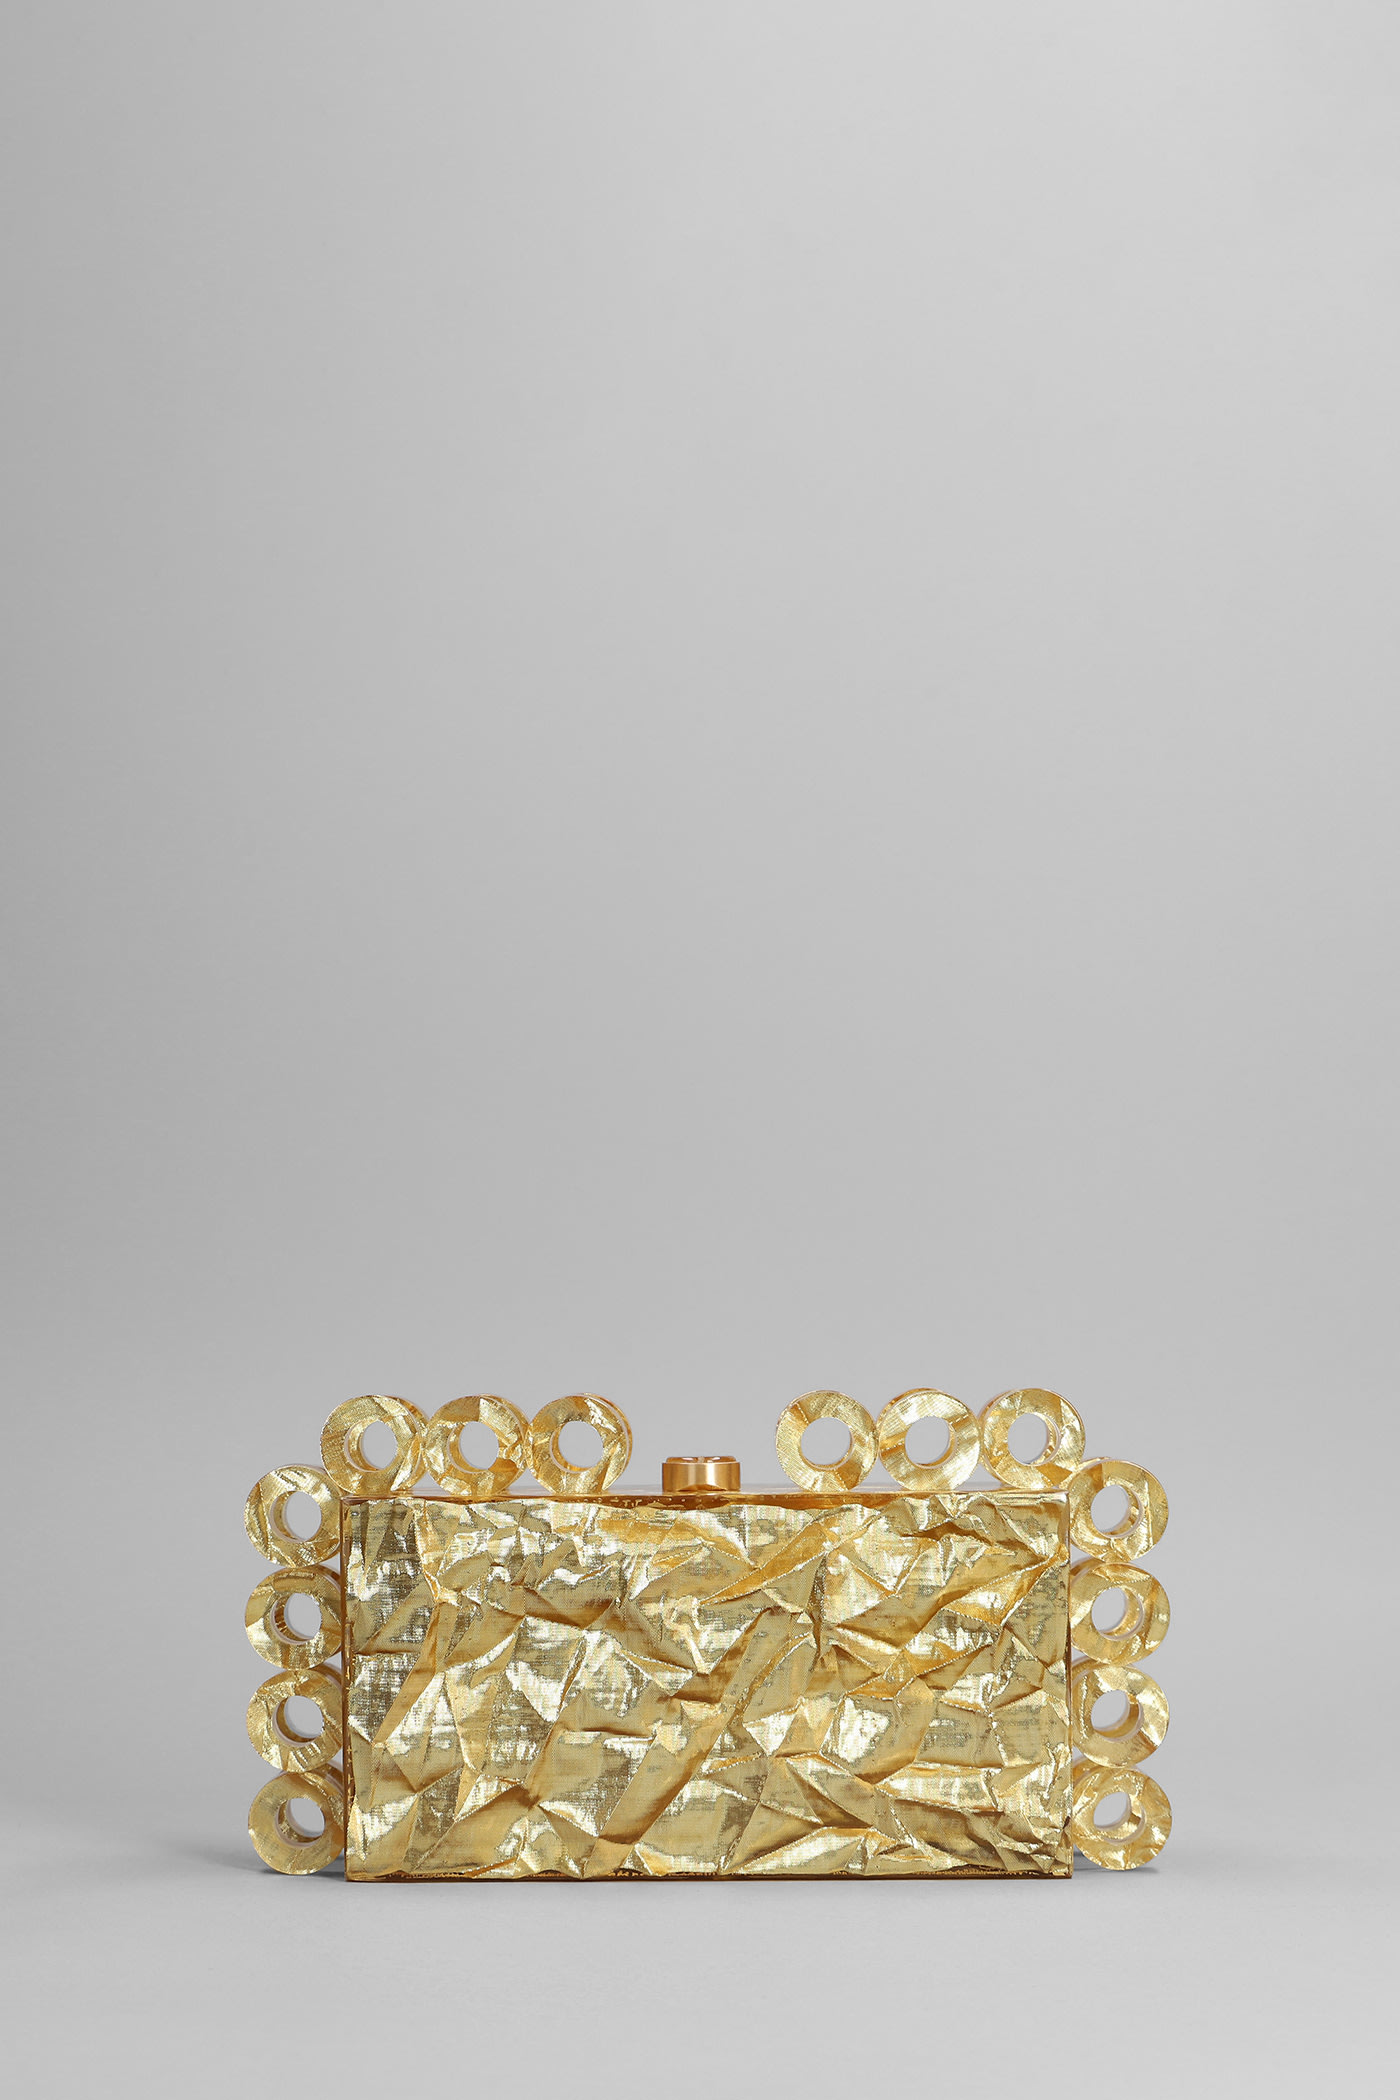 Cult Gaia Harlow Hand Bag In Gold Acrylic